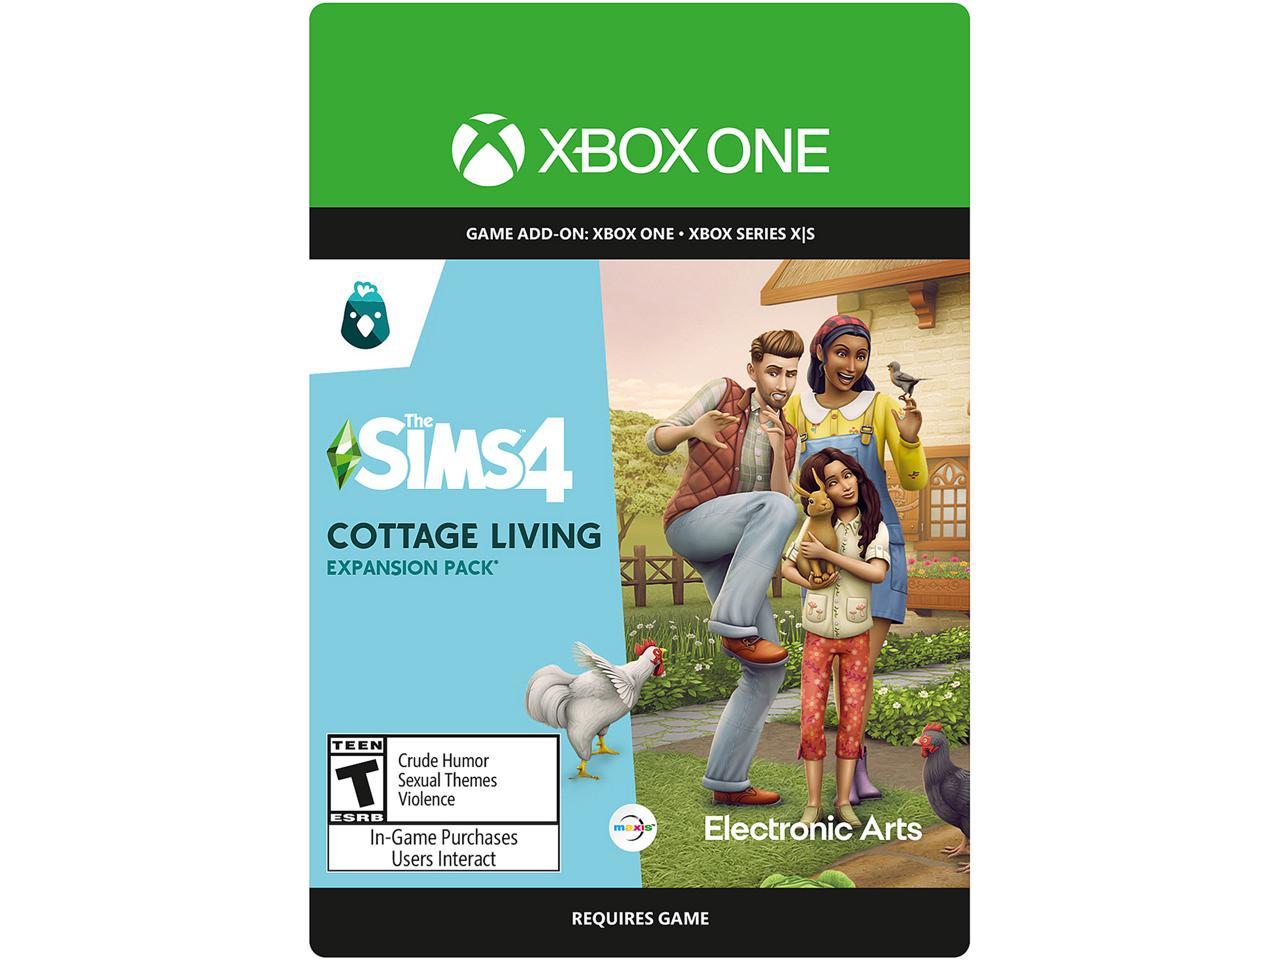 the sims 4 xbox one digital download